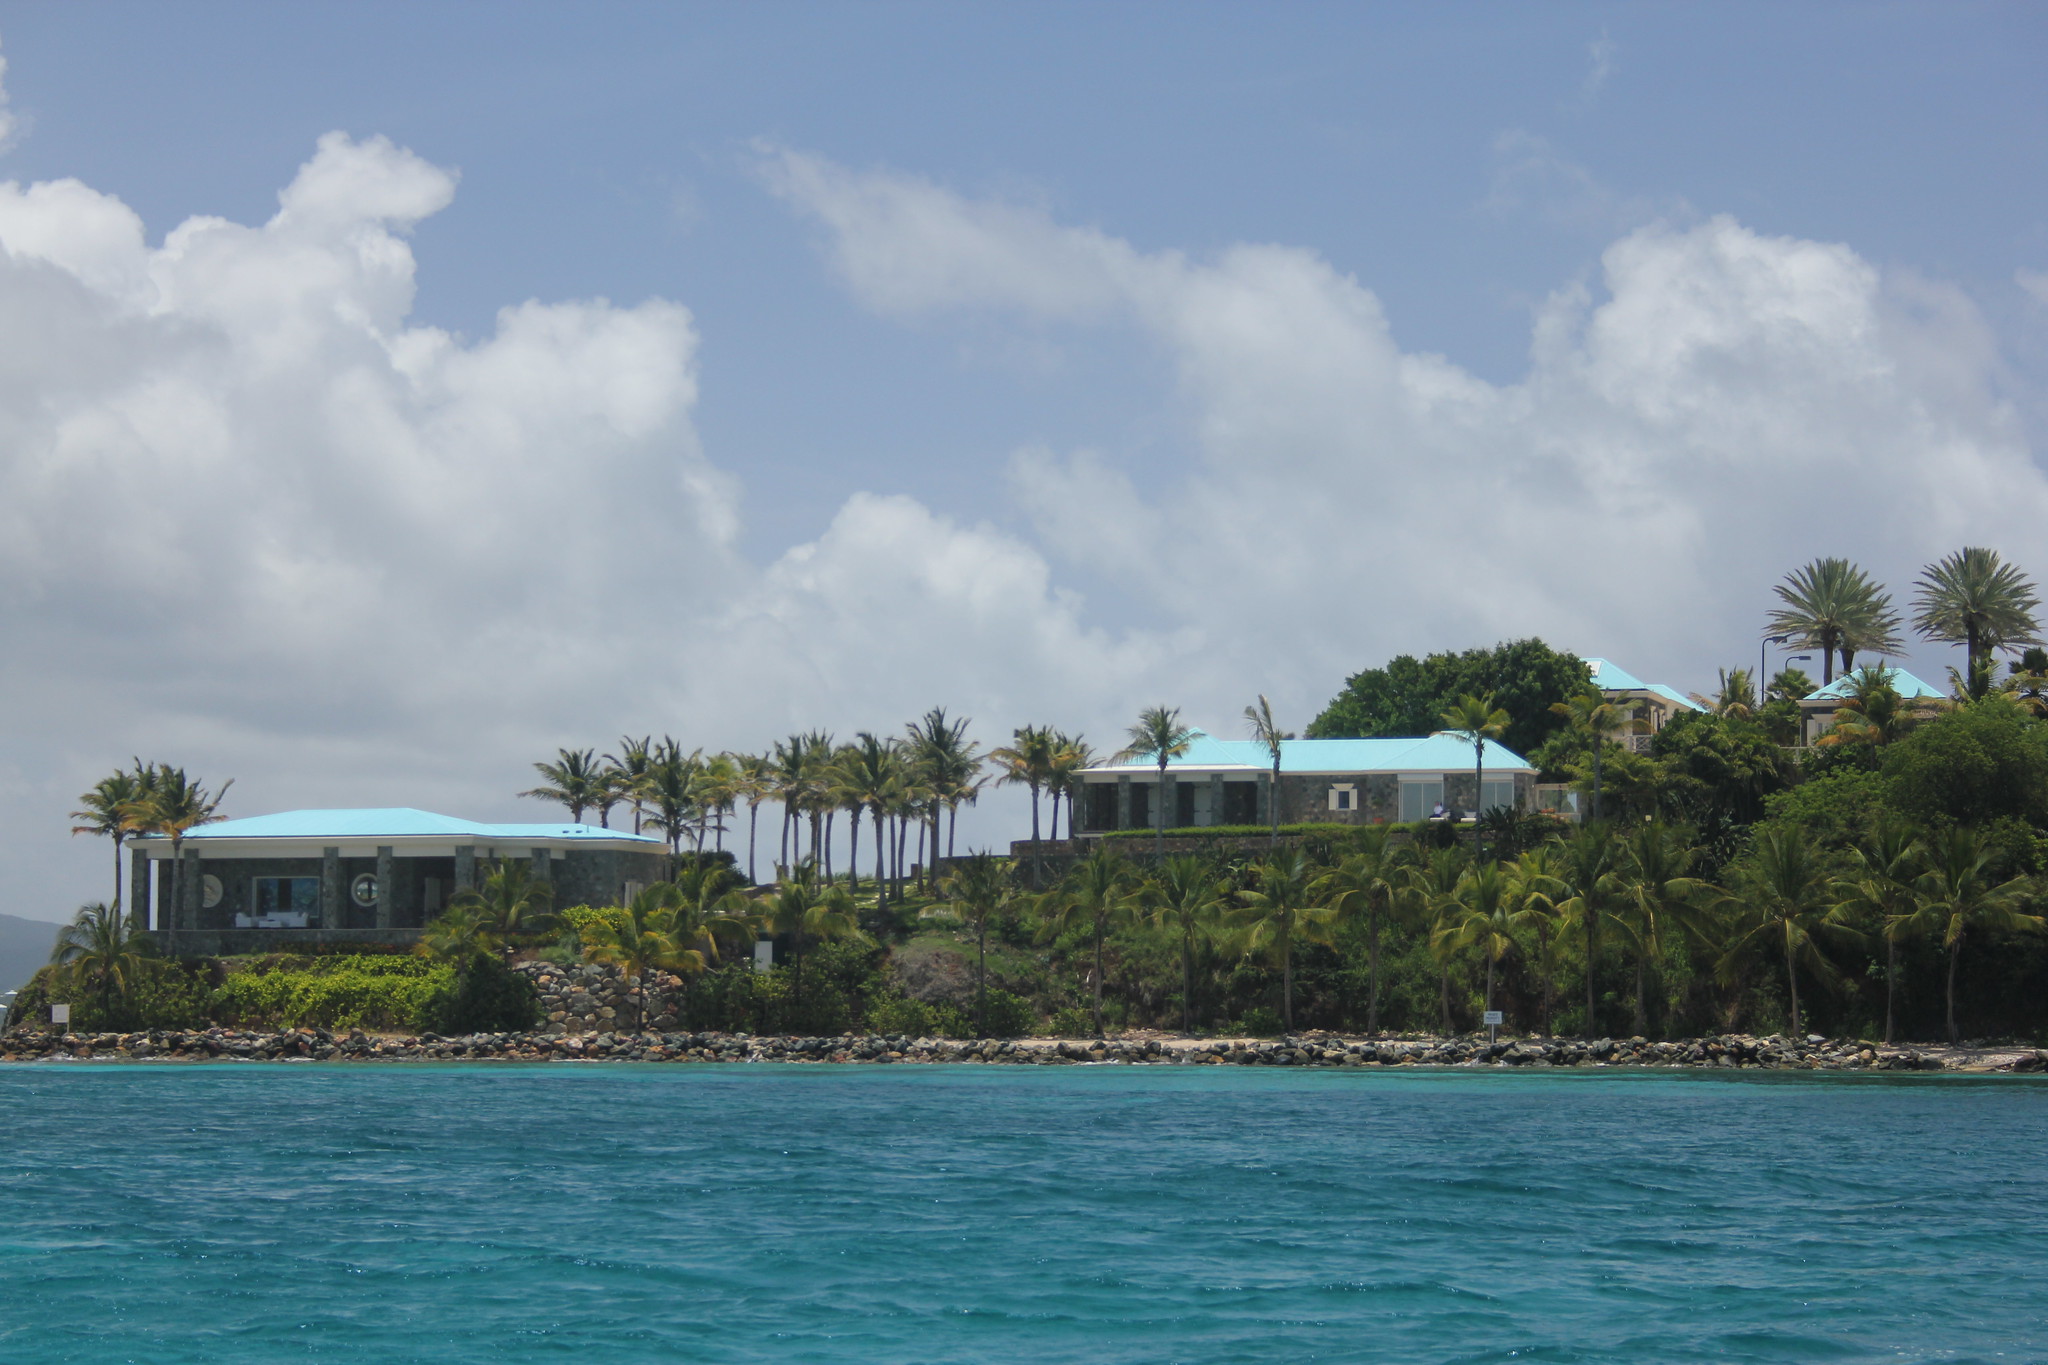 Two low slung buildings on a palm tree island above blue waters, where Jeffery Epstein vacationed